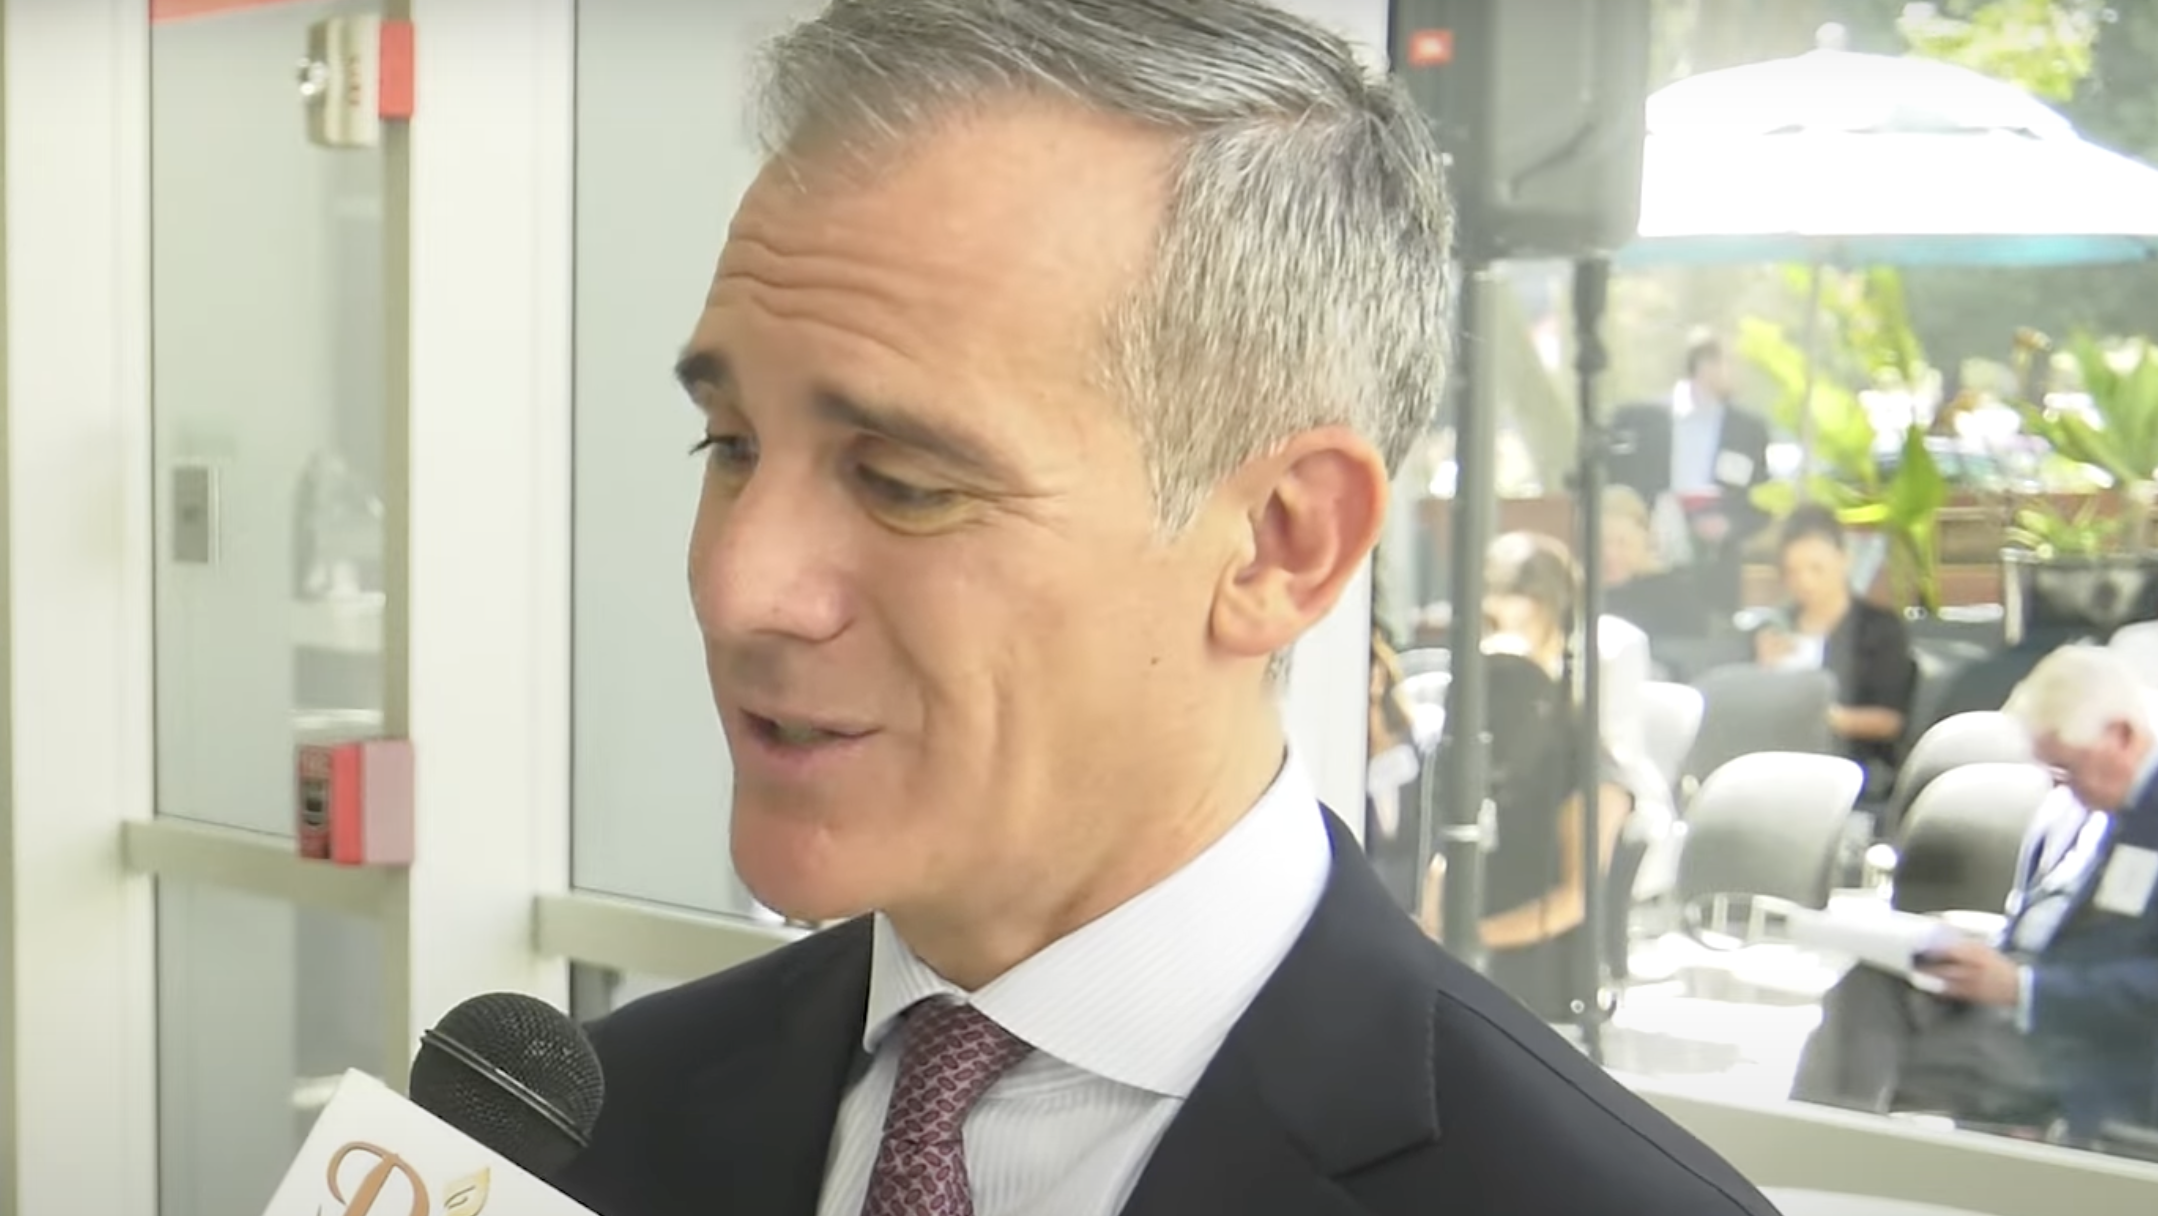 EXCLUSIVE: Ambassador Eric Garcetti on US-India ‘it’s a multiplicative relationship, not additive’